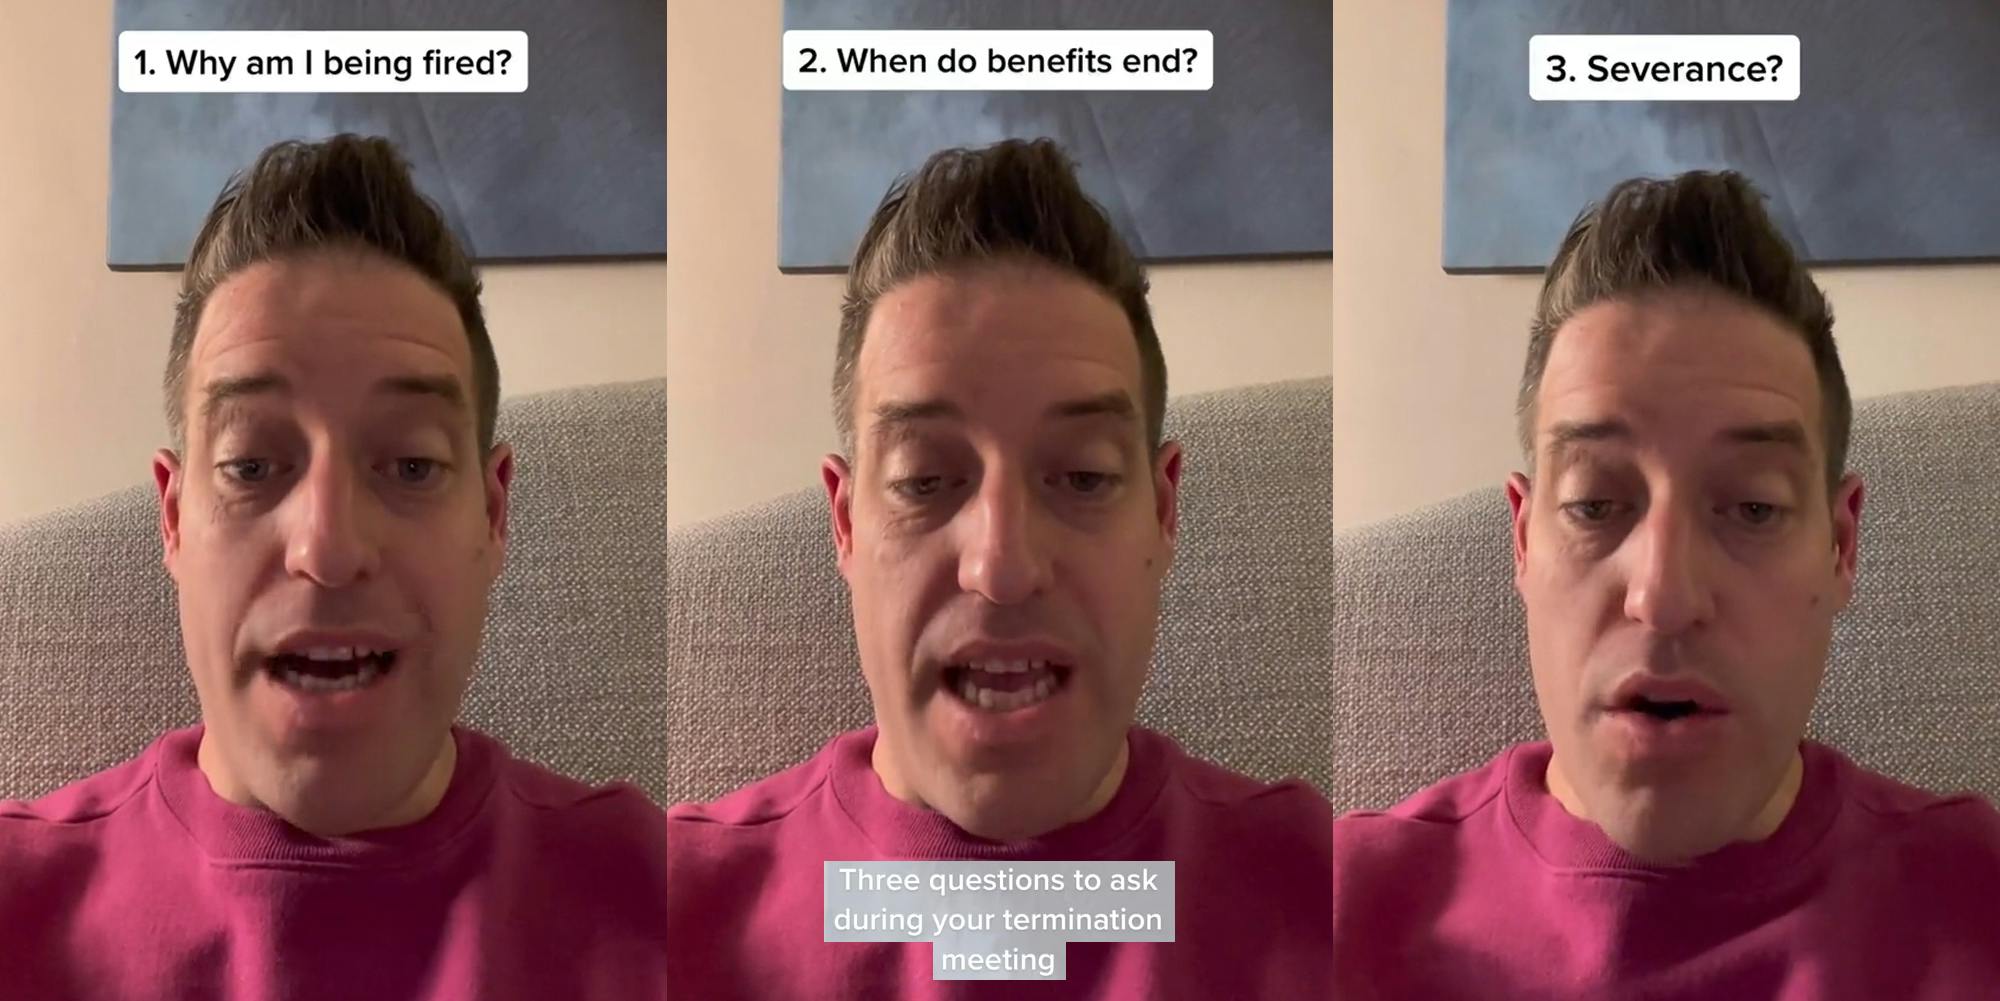 man speaking on couch with caption "1. Why am I being fired?" (l) man speaking on couch with captions "2. When do benefits end?" "Three questions to ask during your termination meeting" (c) man speaking on couch with caption "3. Severance?" (r)